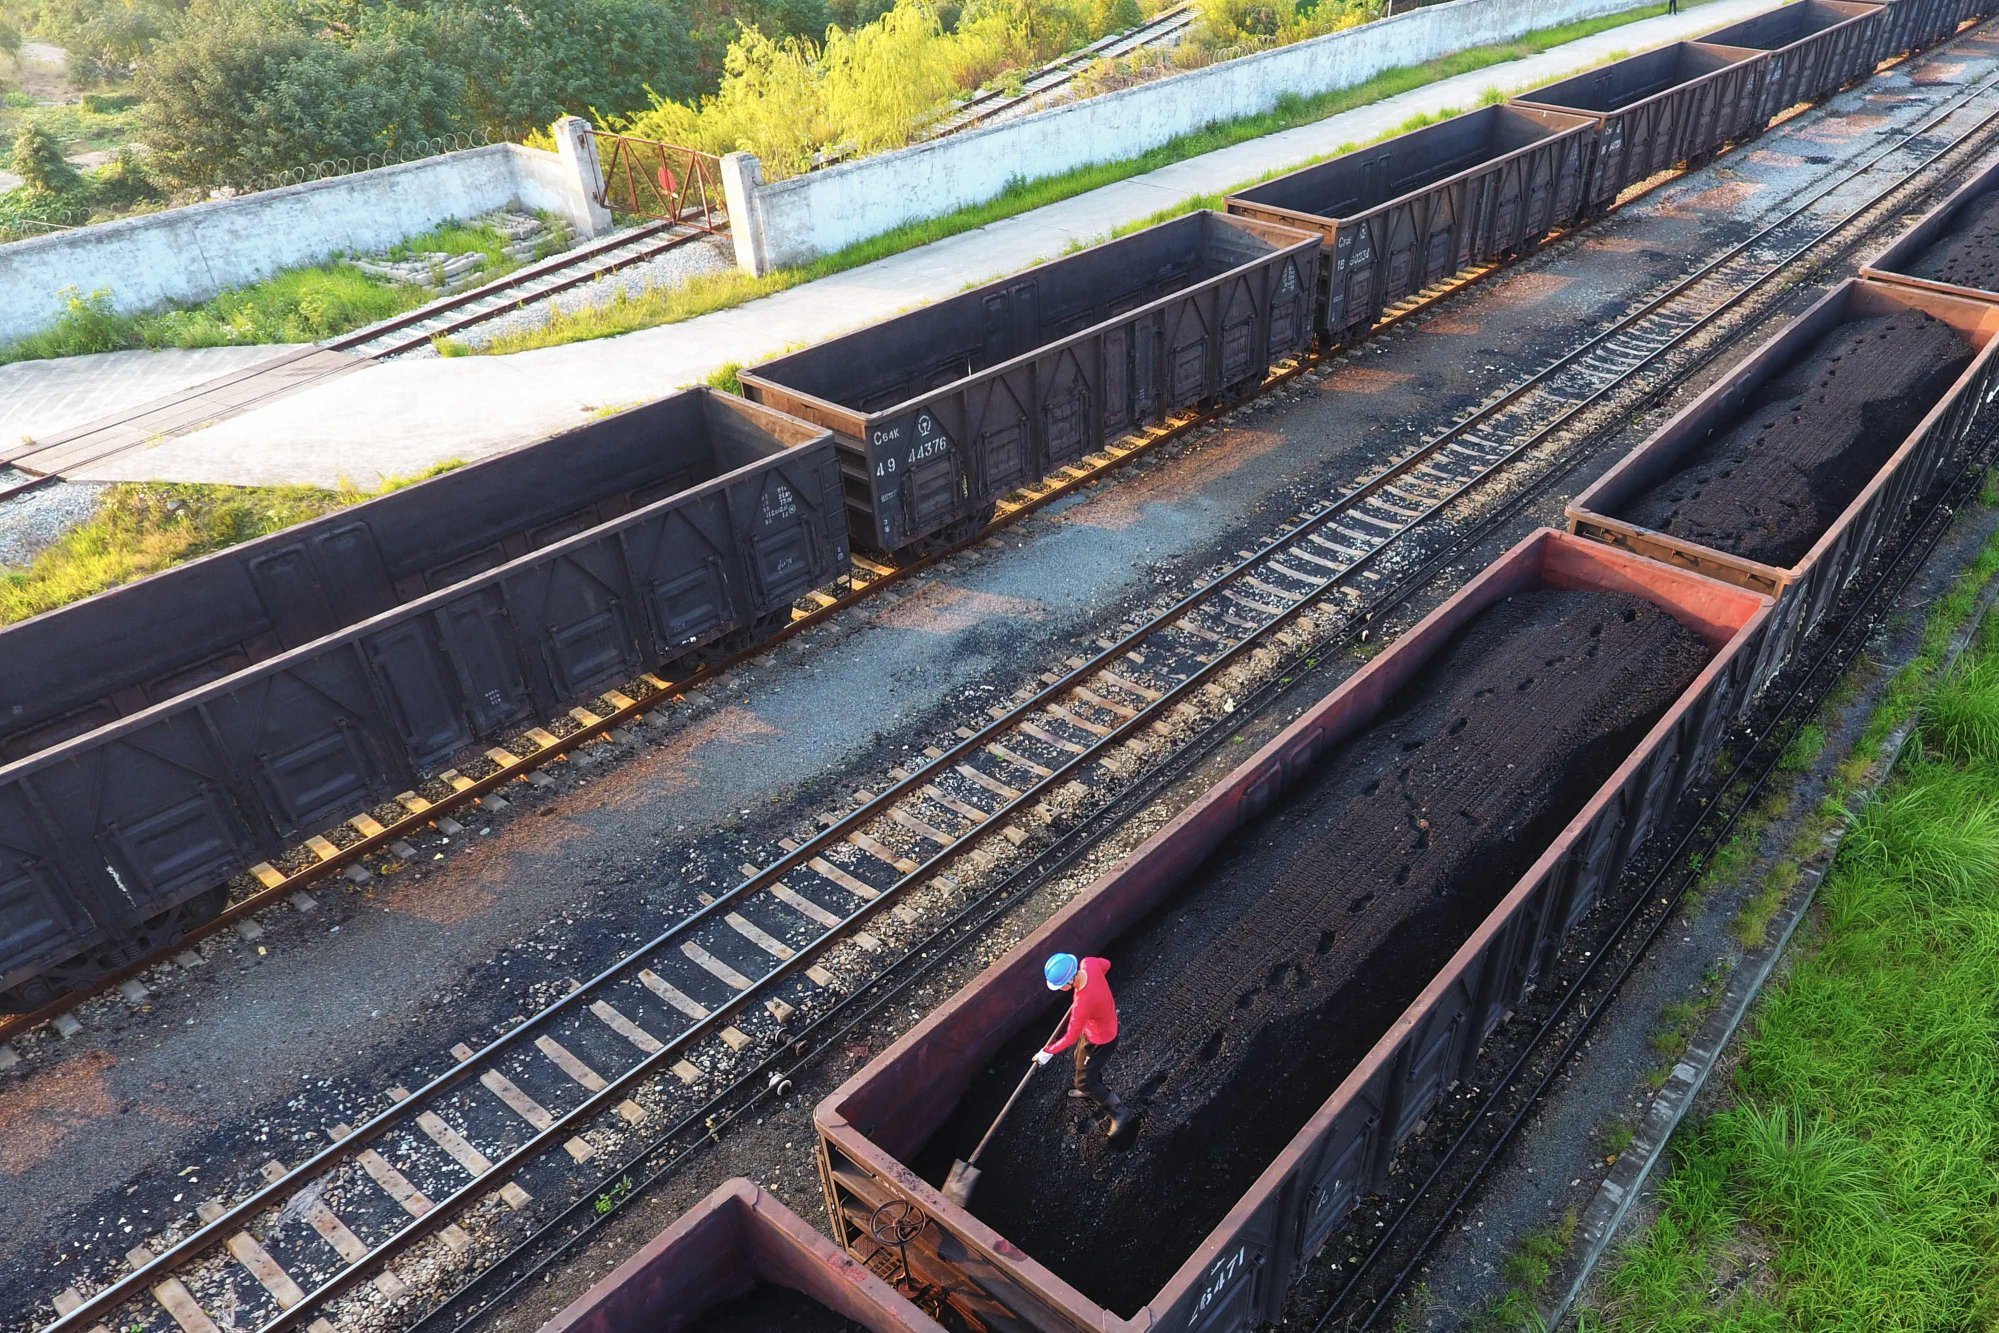 A worker levels coal on a train car in Jiujiang, in China’s central Jiangxi province, on October 24, 2021. The country has pledged to start phasing down coal consumption after 2025. Photo: Agence France-Presse